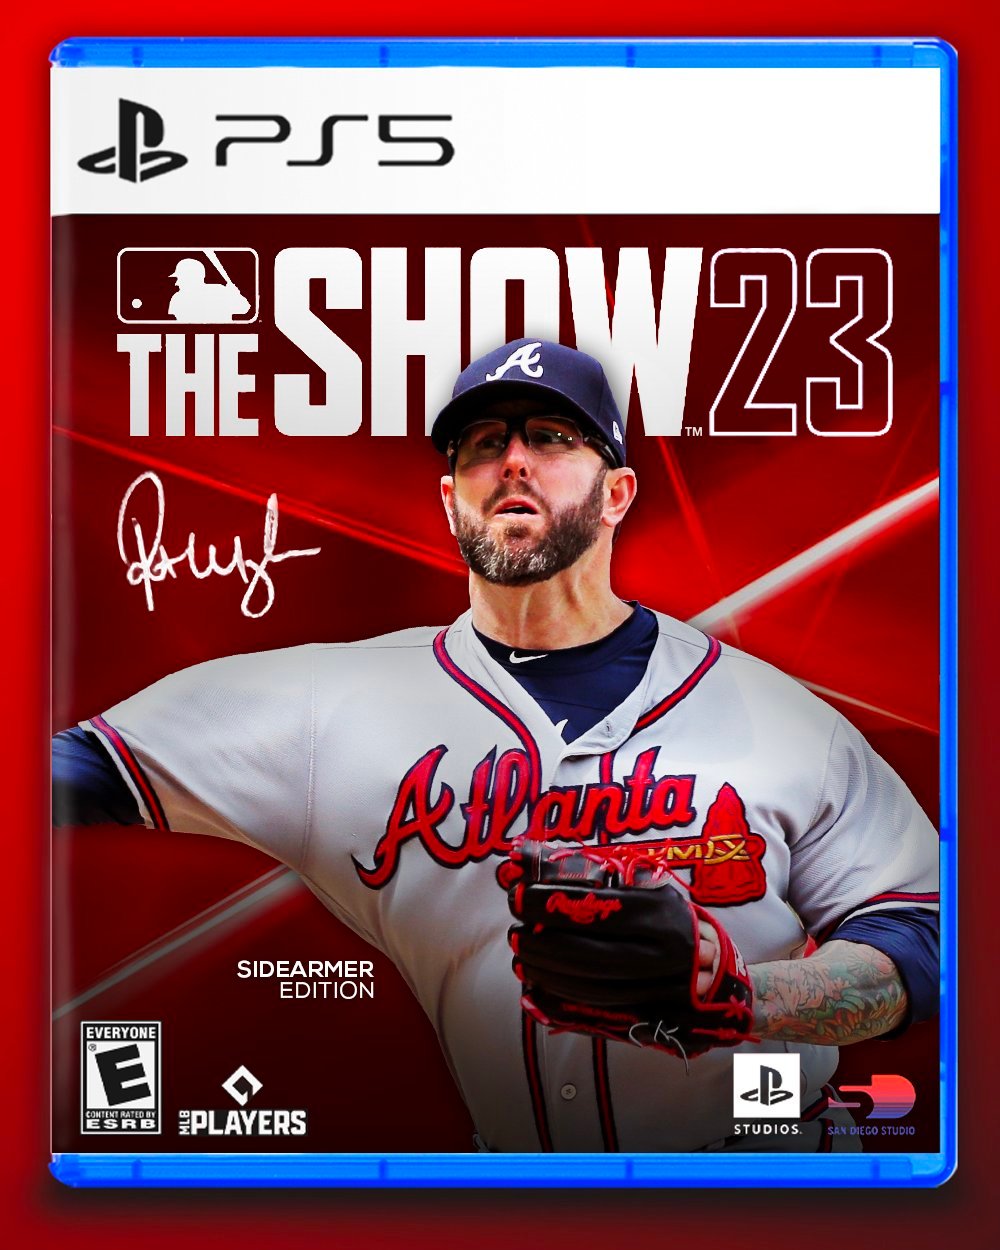 Farm To Fame on X: MLB THE SHOW 23 COVER LEAKED EARLY!   / X